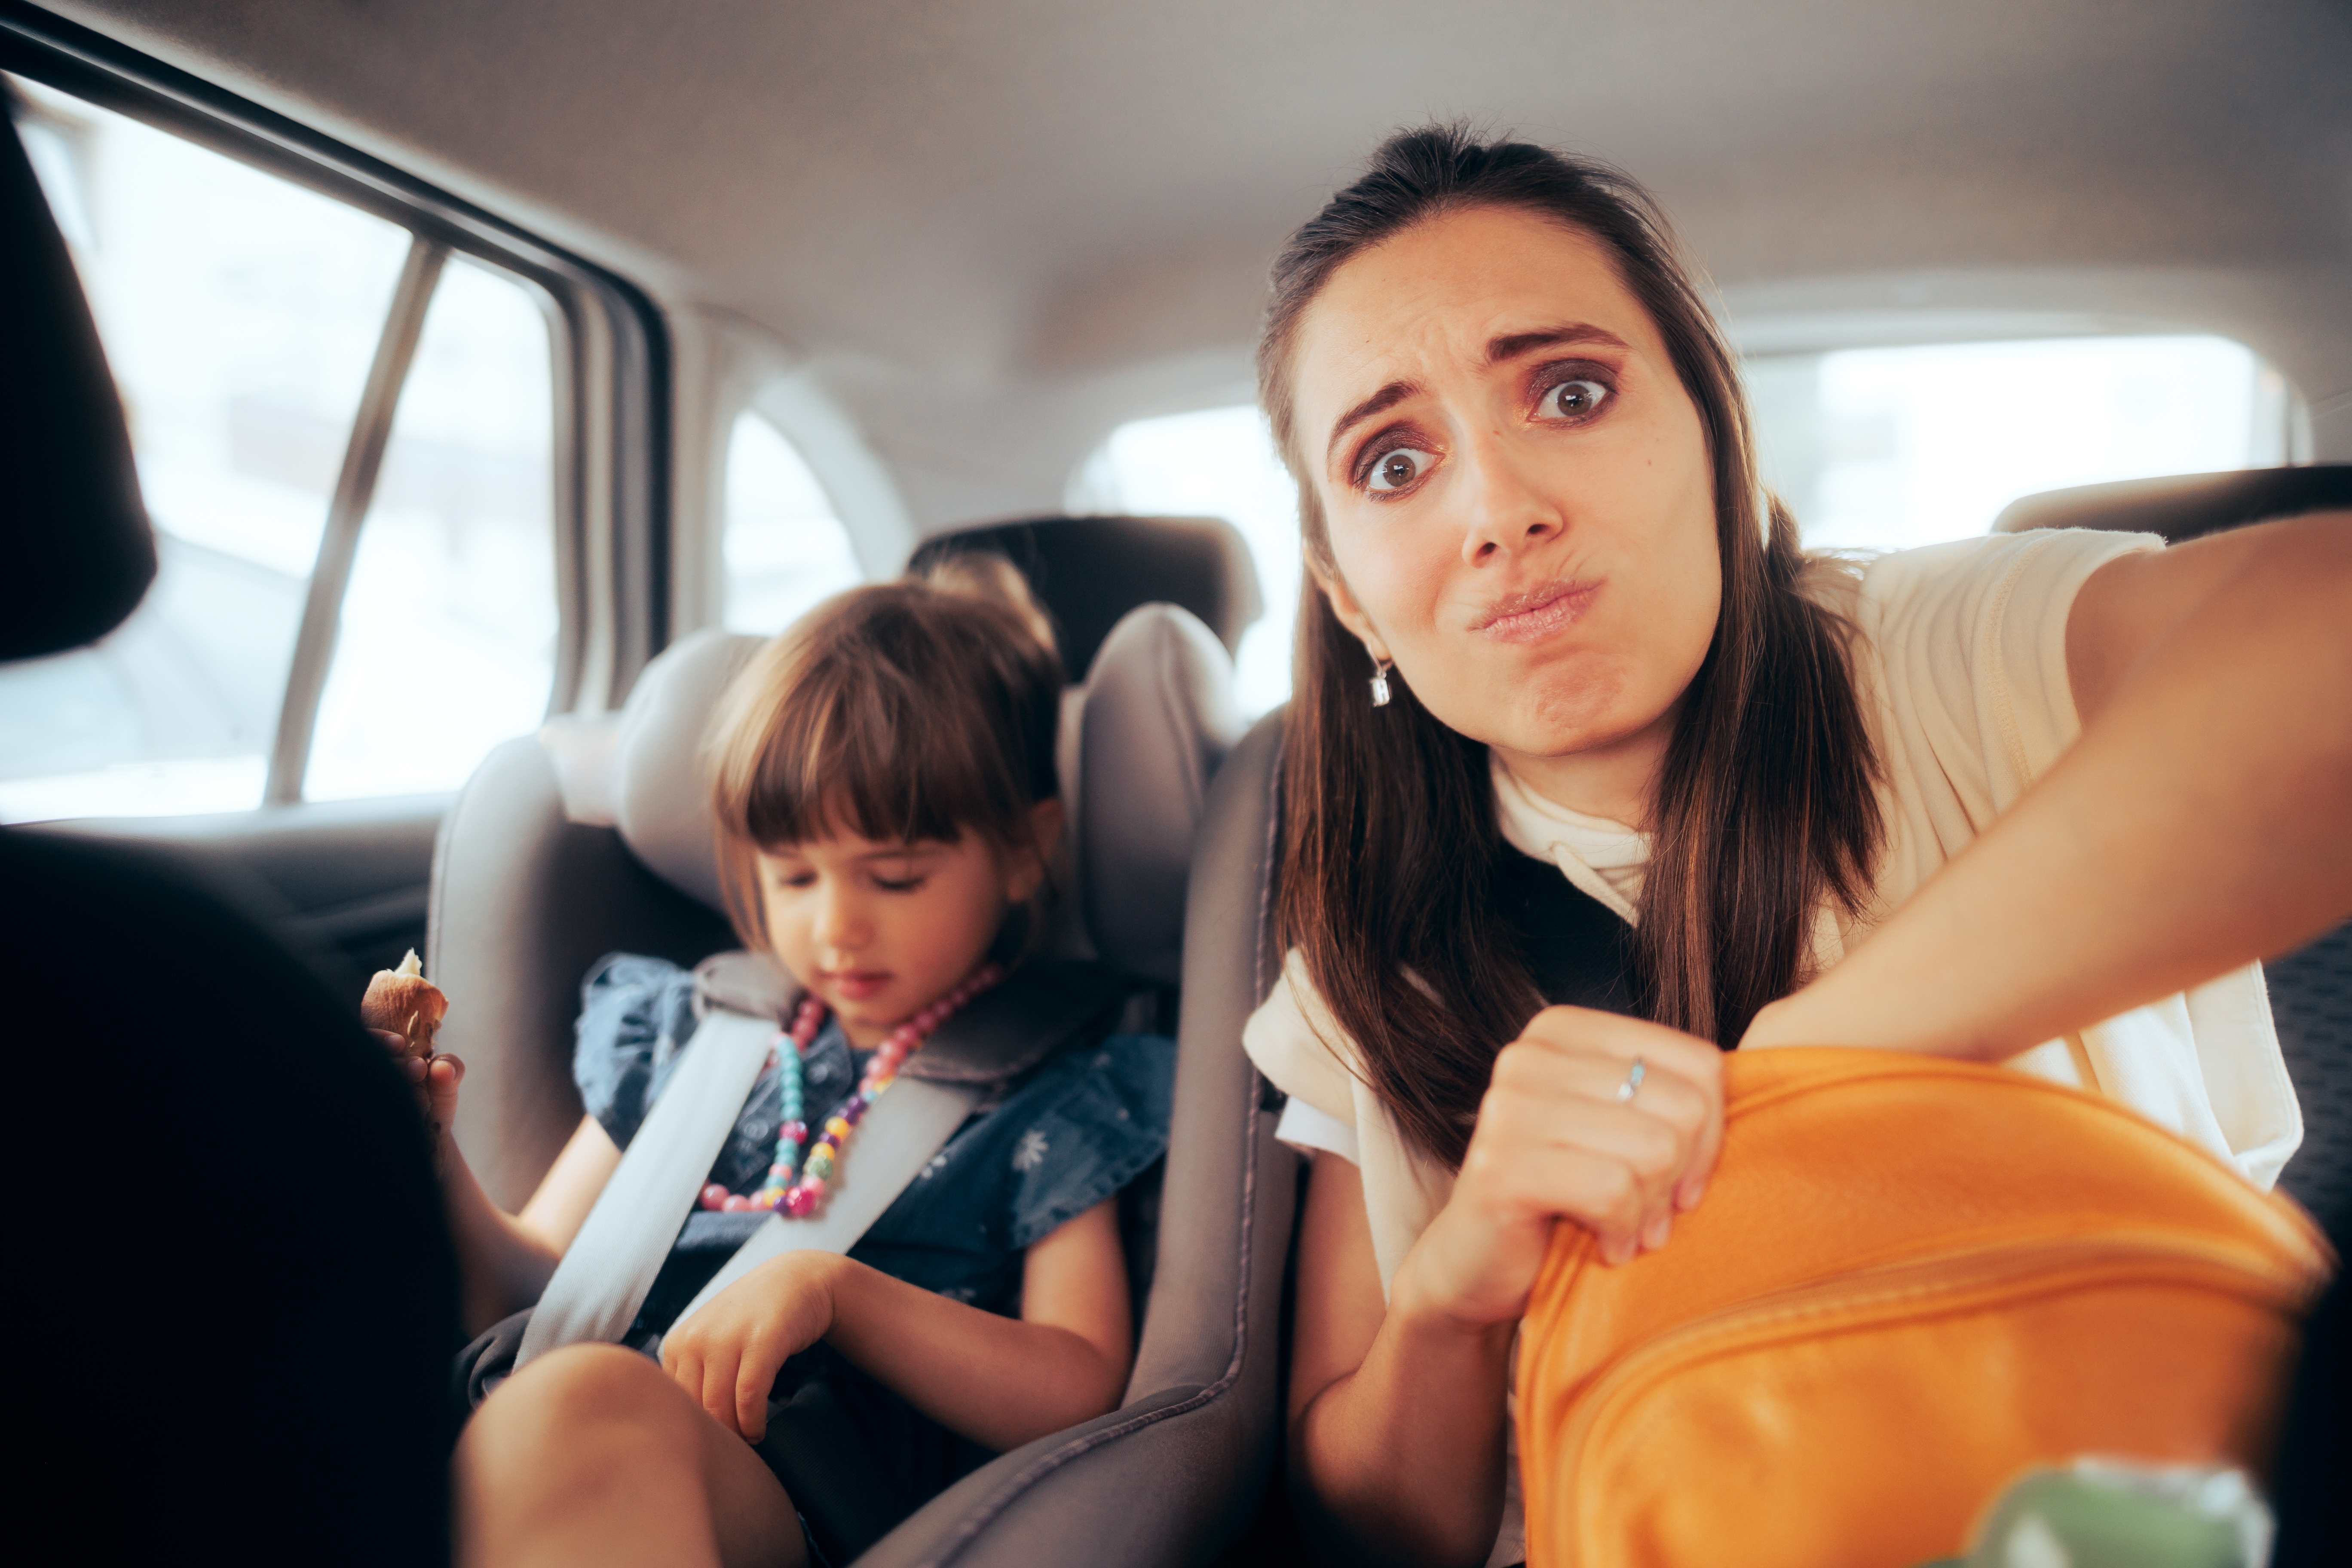 A stressed woman sitting in a car with a little girl | Source: Shutterstock